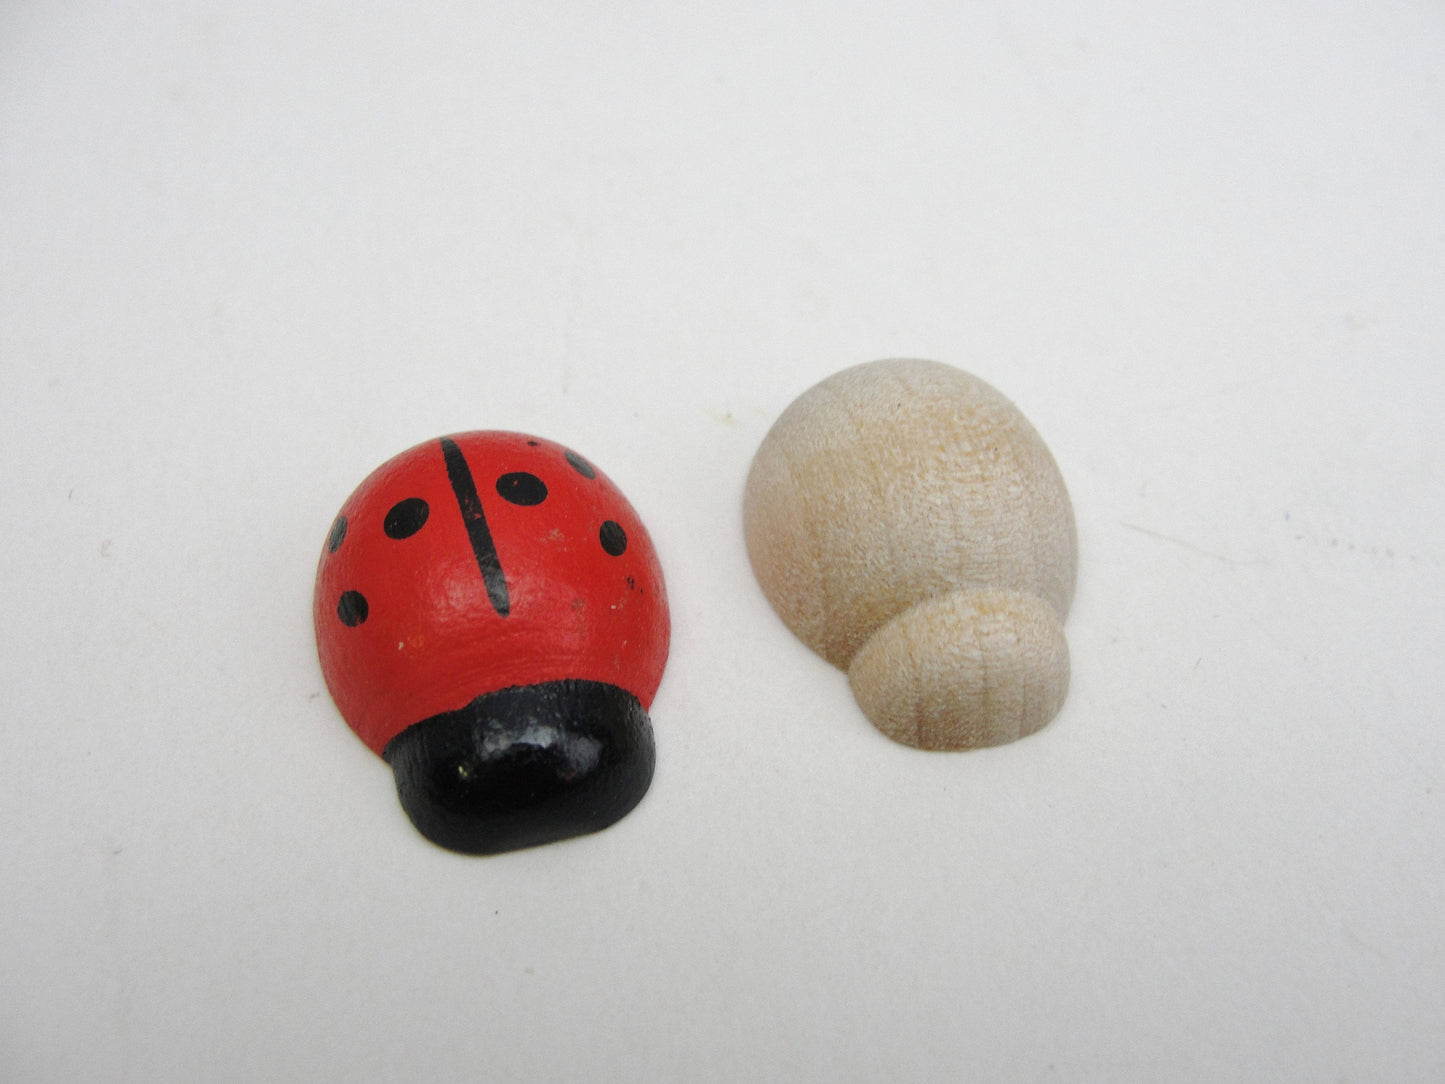 Wooden ladybug choose between unfinished or painted red 1" long set of 6